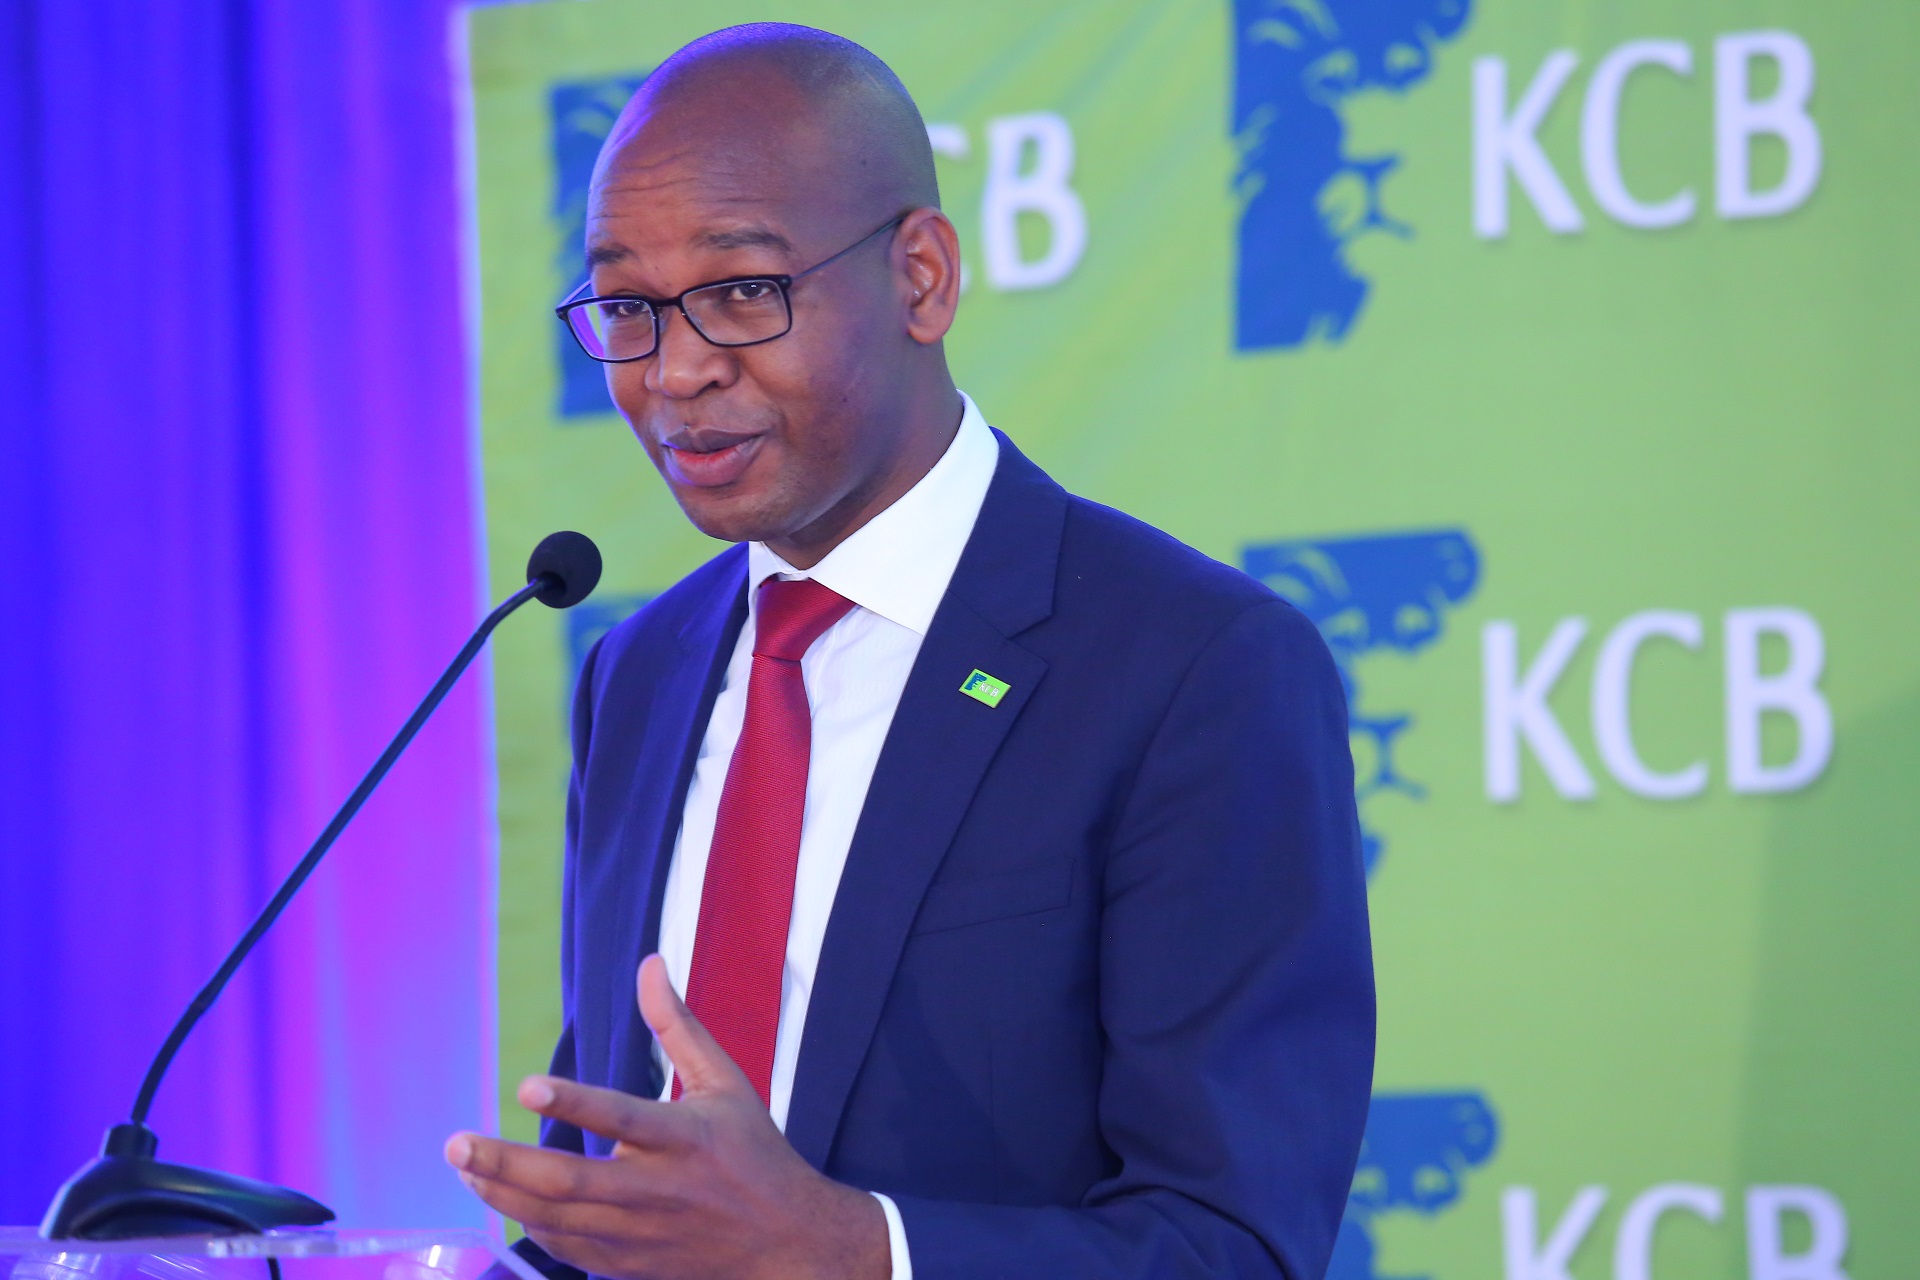 KCB CEO Joshua Oigara, KCB bank has received the nod to auction City Hall assets. the city Government has defaulted on loan payments.